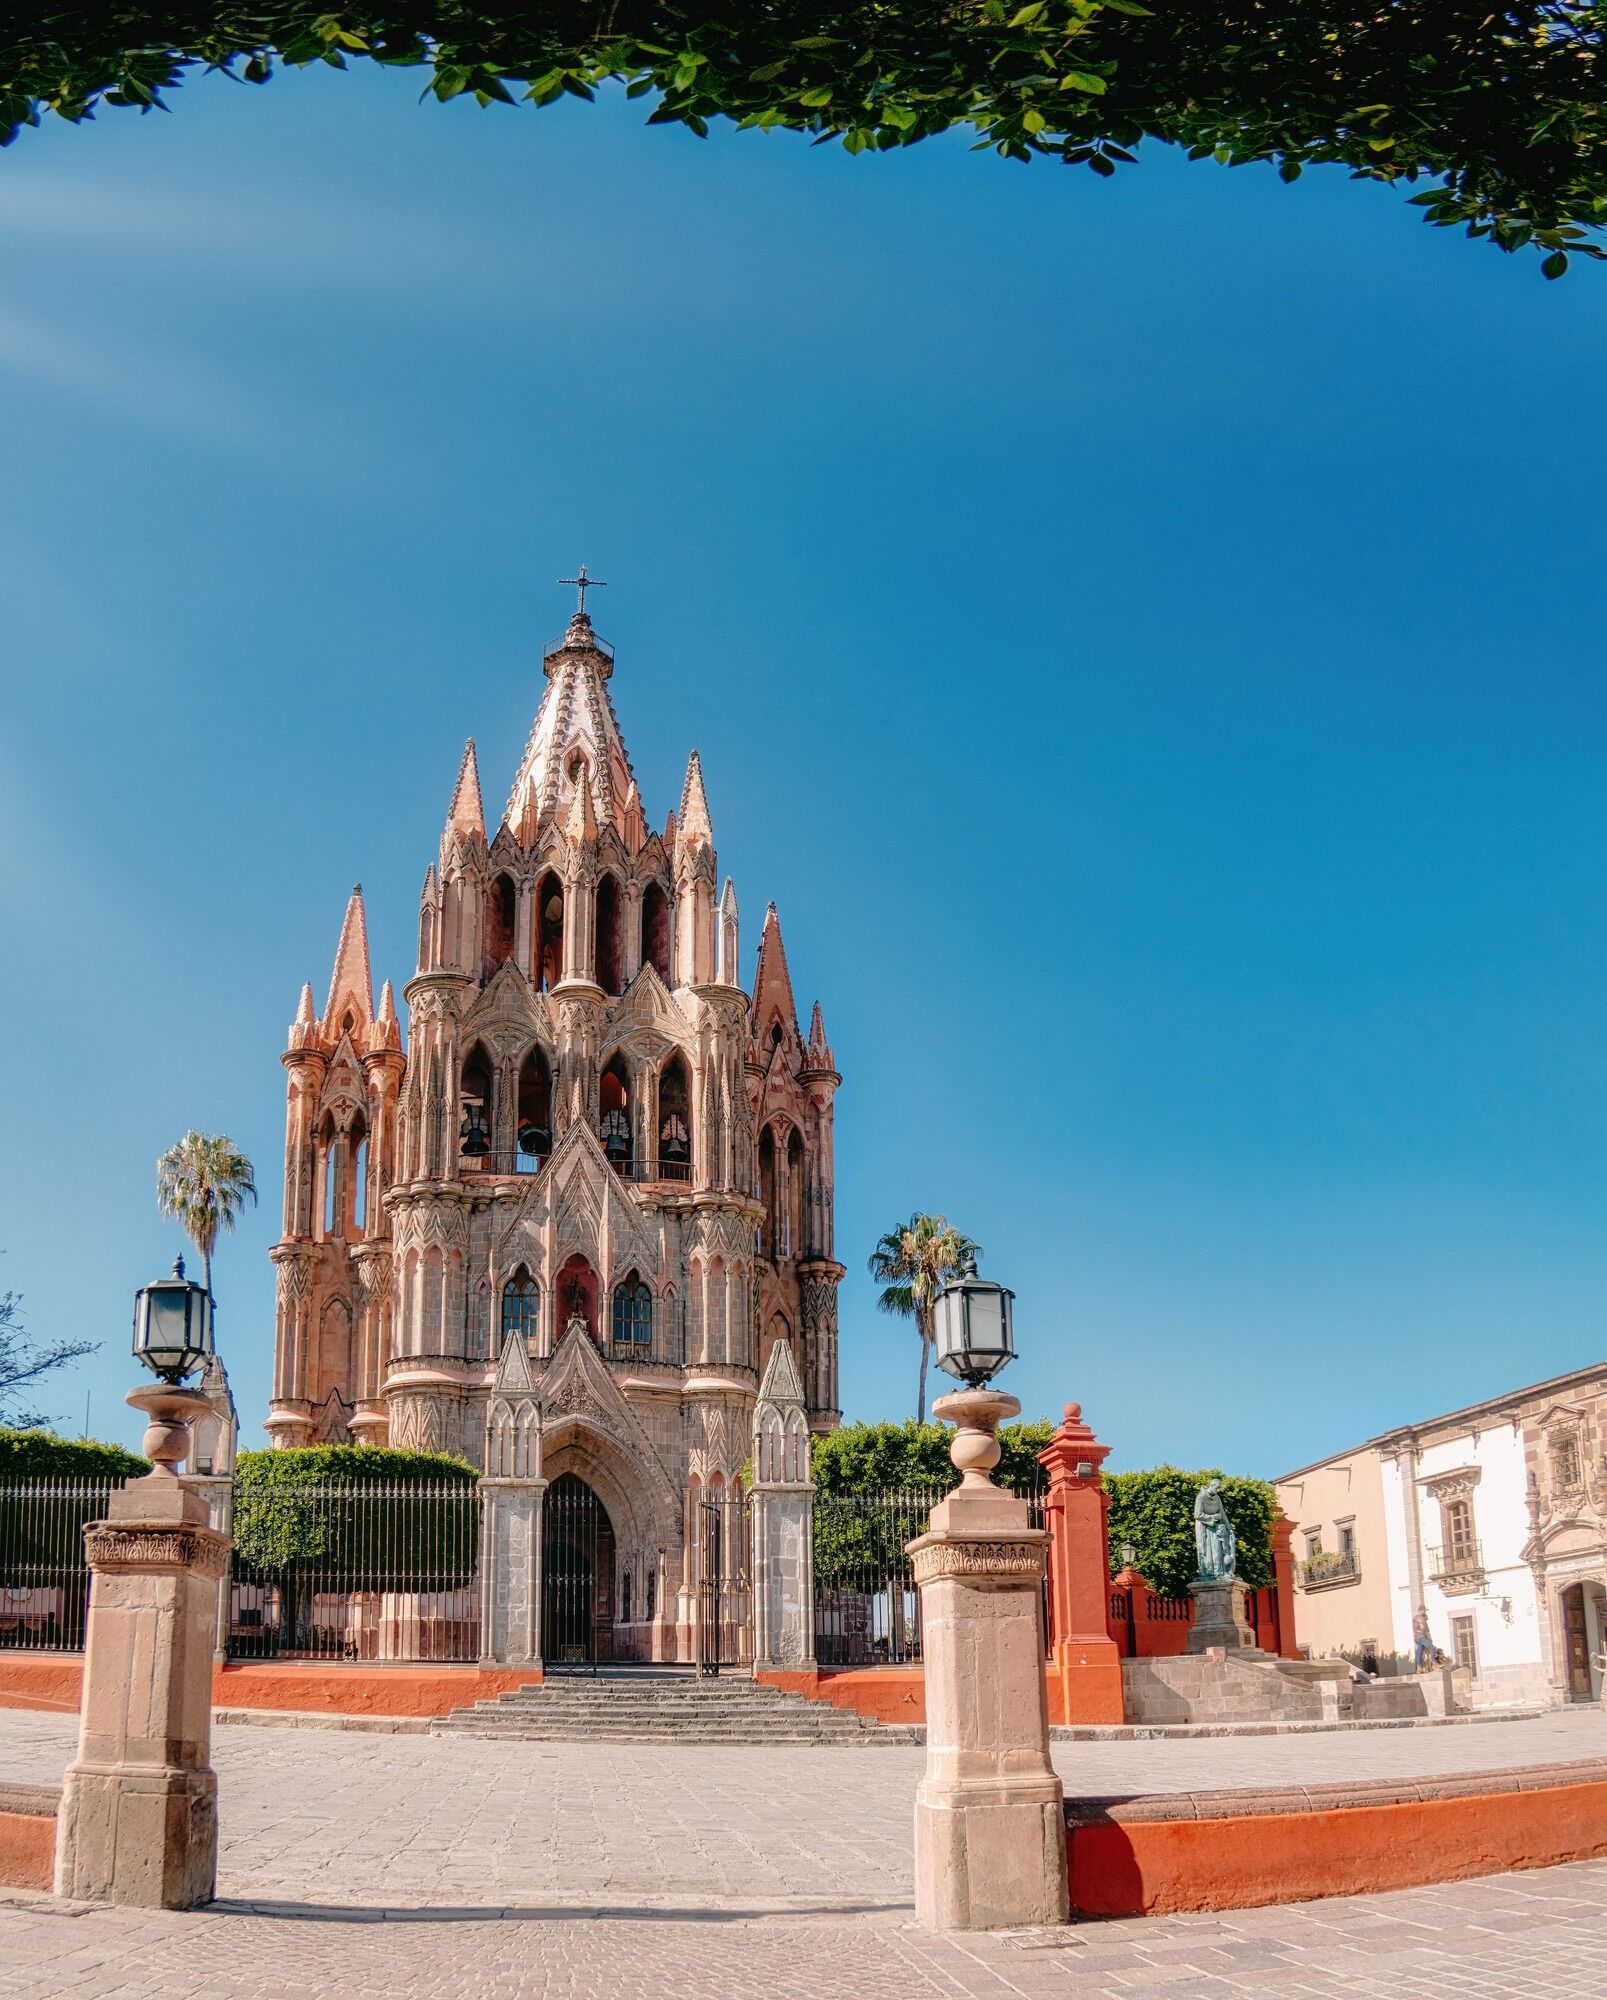 The cheapest way to fly to San Miguel de Allende and see the winner of 2 of the world's most beautiful cities